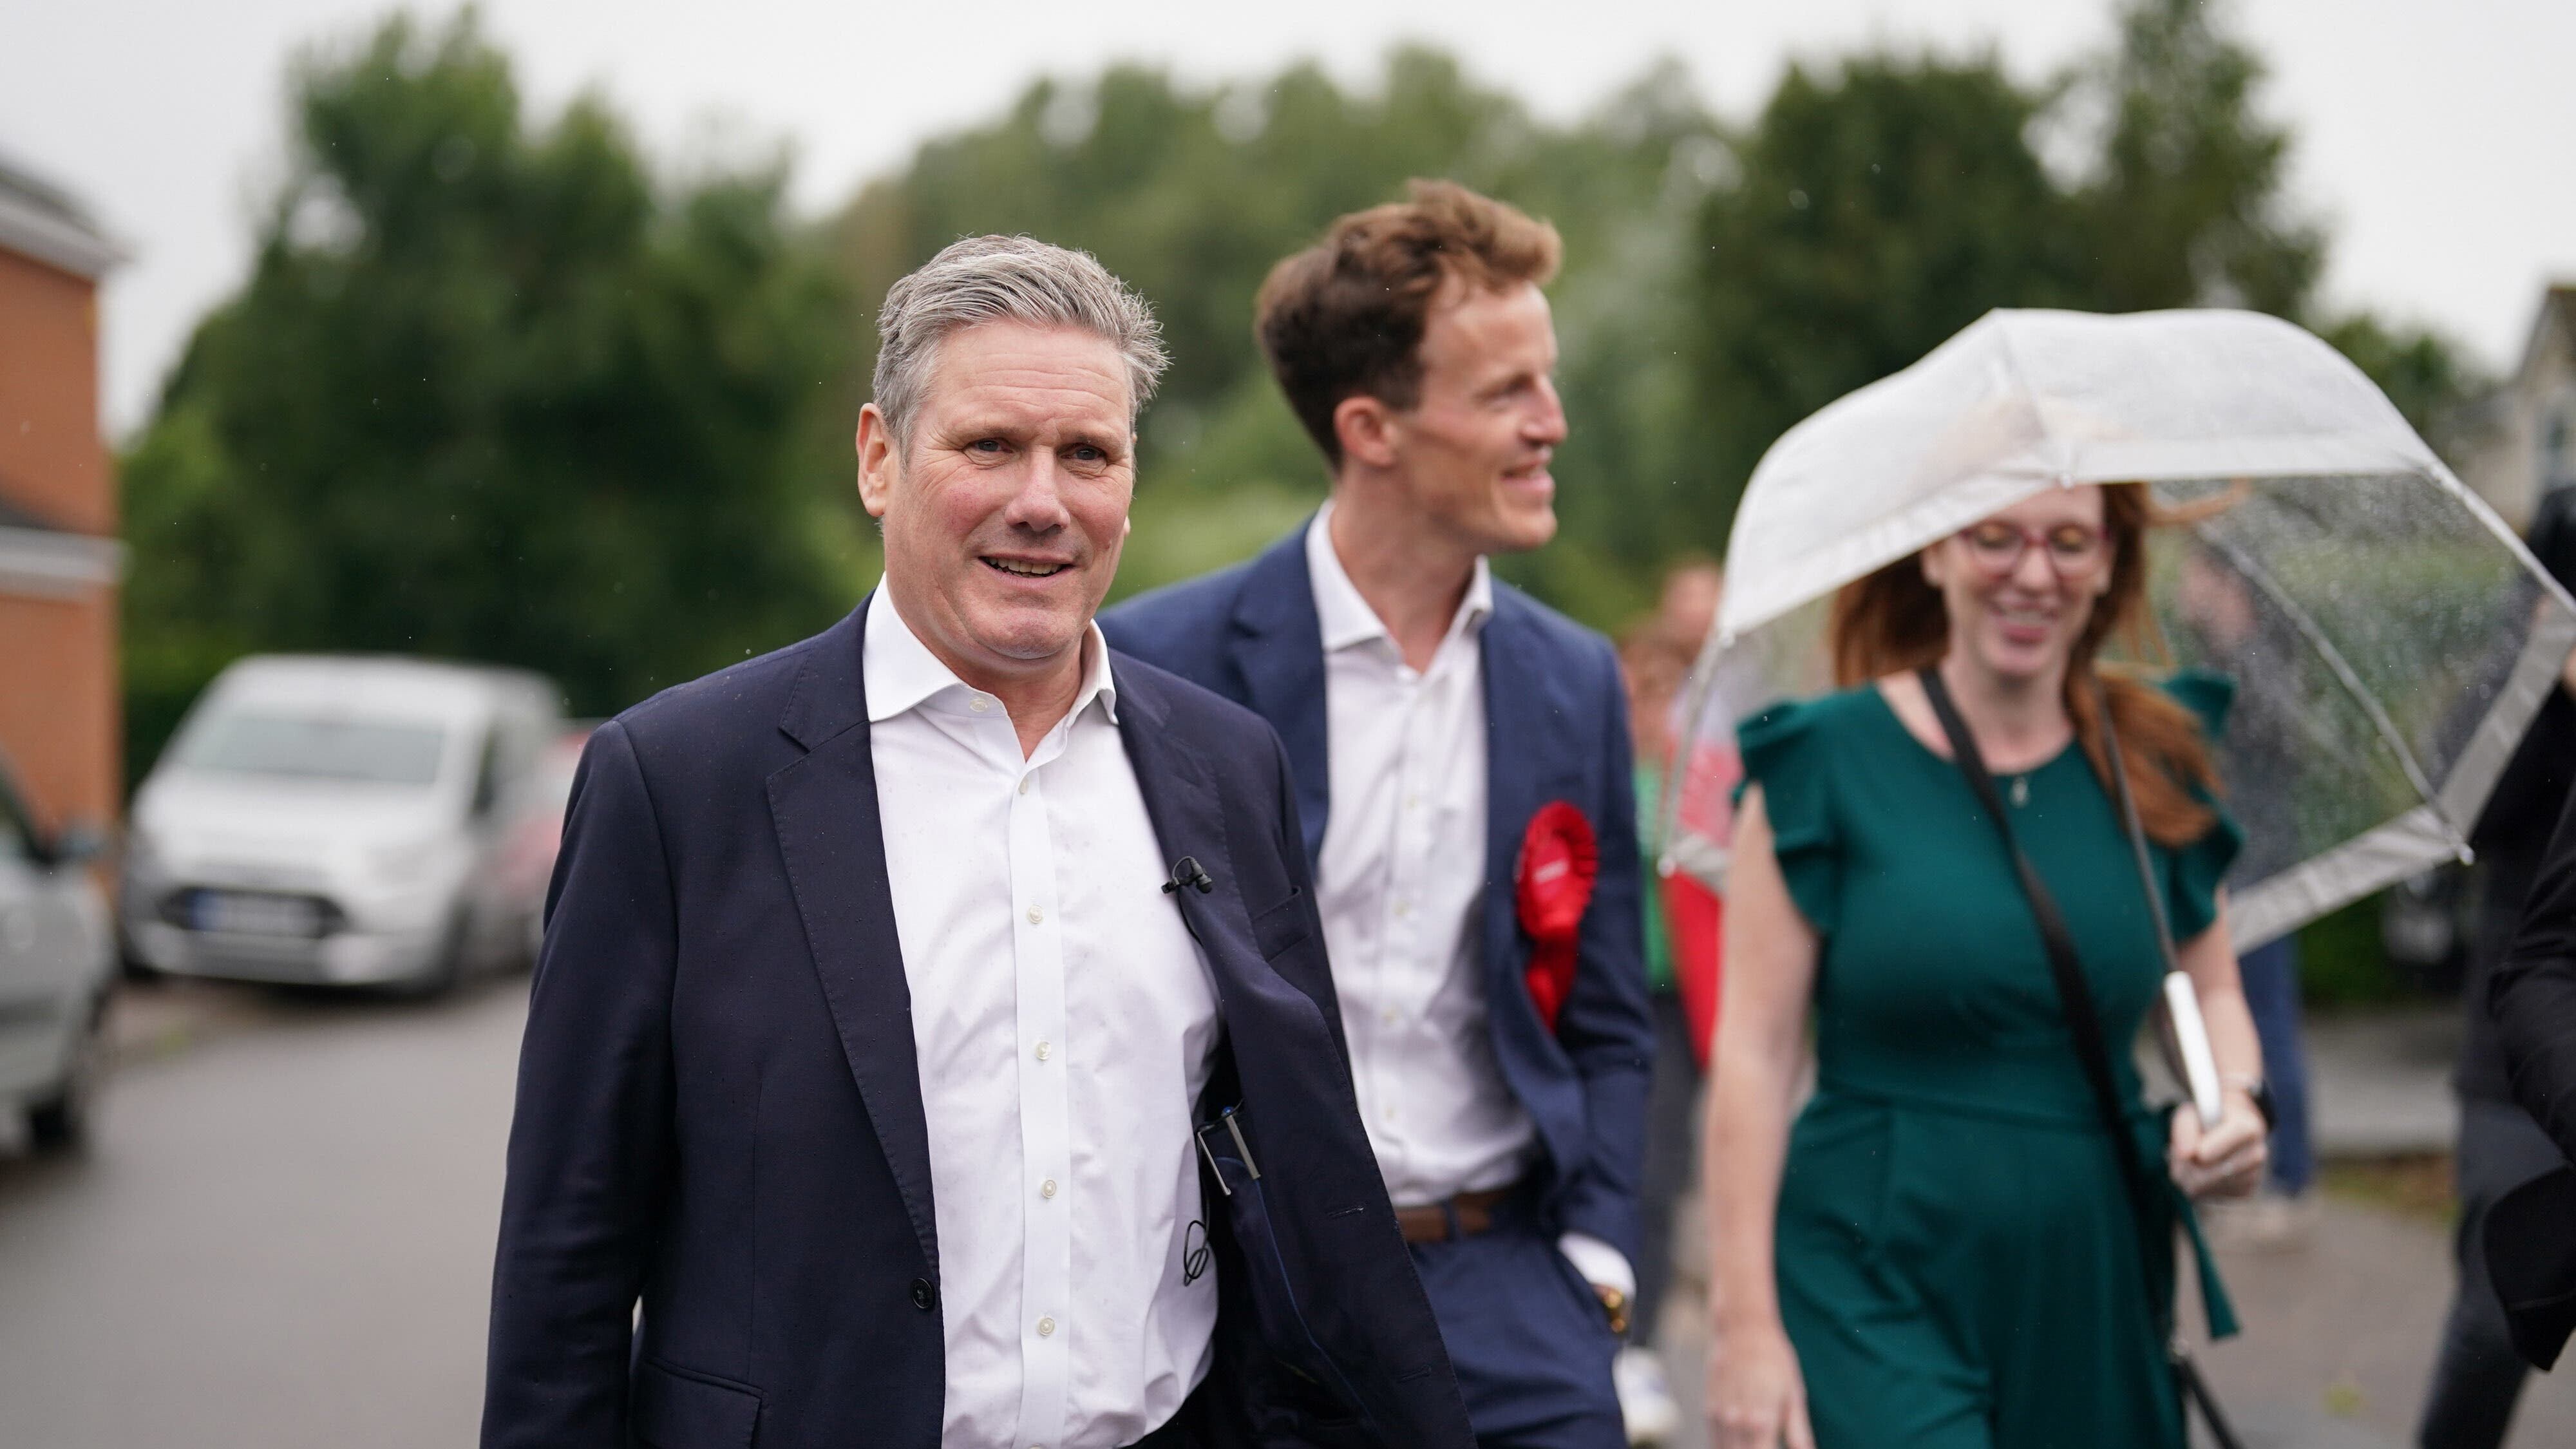 Labour leader Sir Keir Starmer and deputy leader Angela Rayner with Alistair Strathern, a would-be MP who took part in a Greenpeace protest (Jacob King/PA)